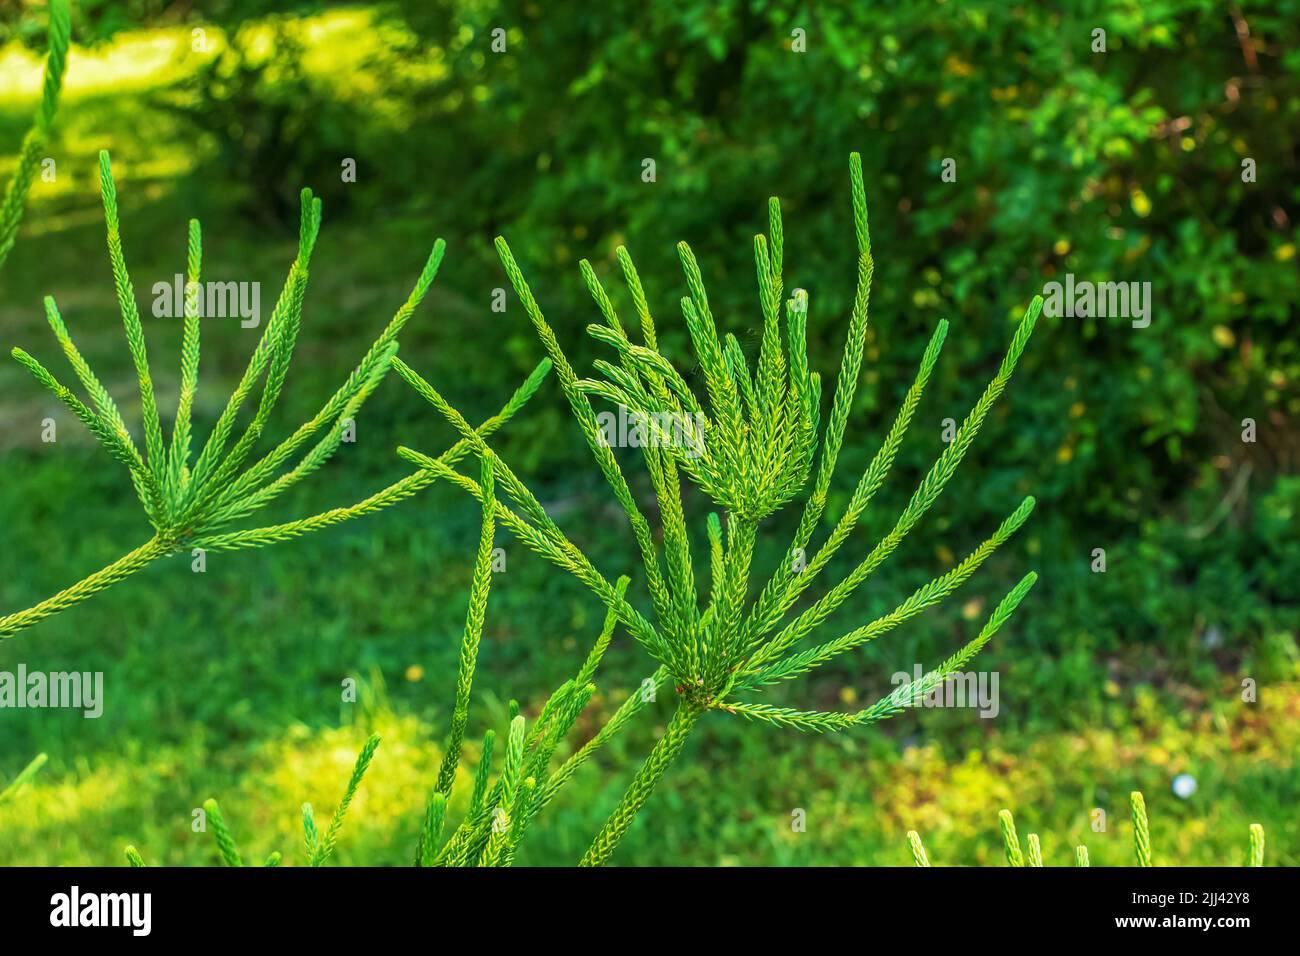 Araucaria araucana - Close up on branches with thick and triangular leaves, scale-like with sharp edges and tips of Monkey puzzle tree or Chilean pine Stock Photo